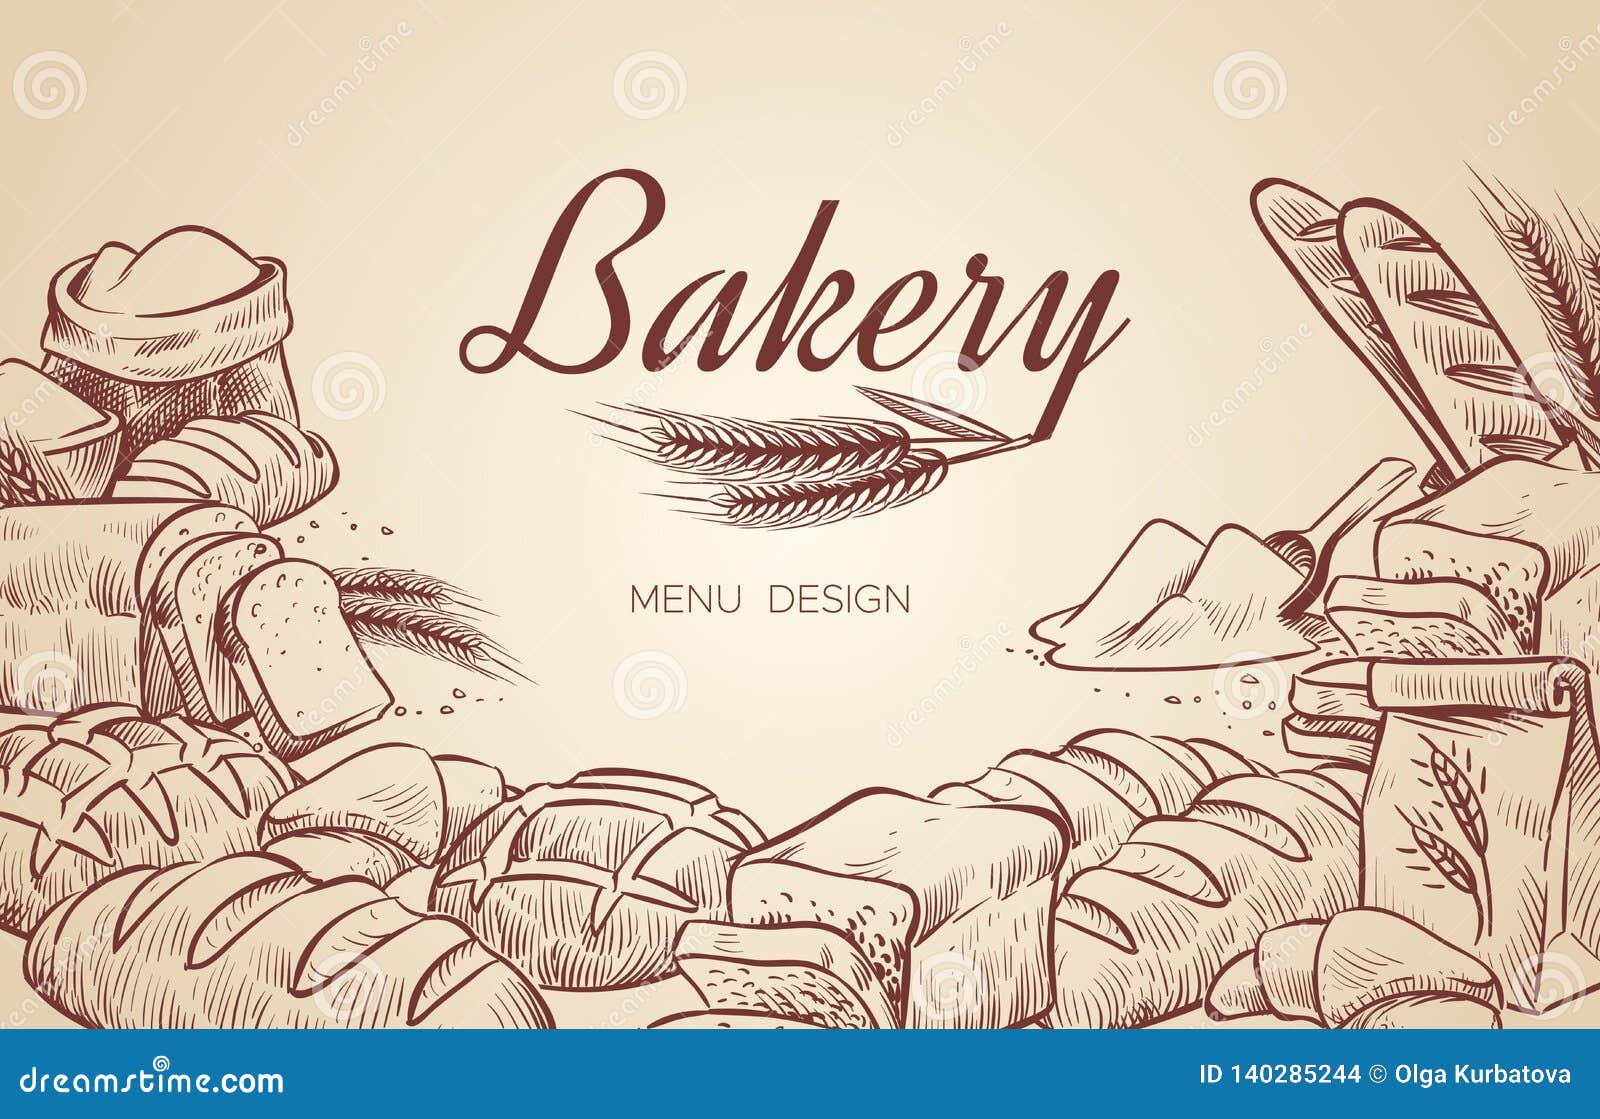 Bakery Background. Hand Drawn Cooking Bread Bakery Bagel Breads Pastry Bake  Baking Culinary Vector Menu Design Stock Vector - Illustration of french,  bakeshop: 140285244